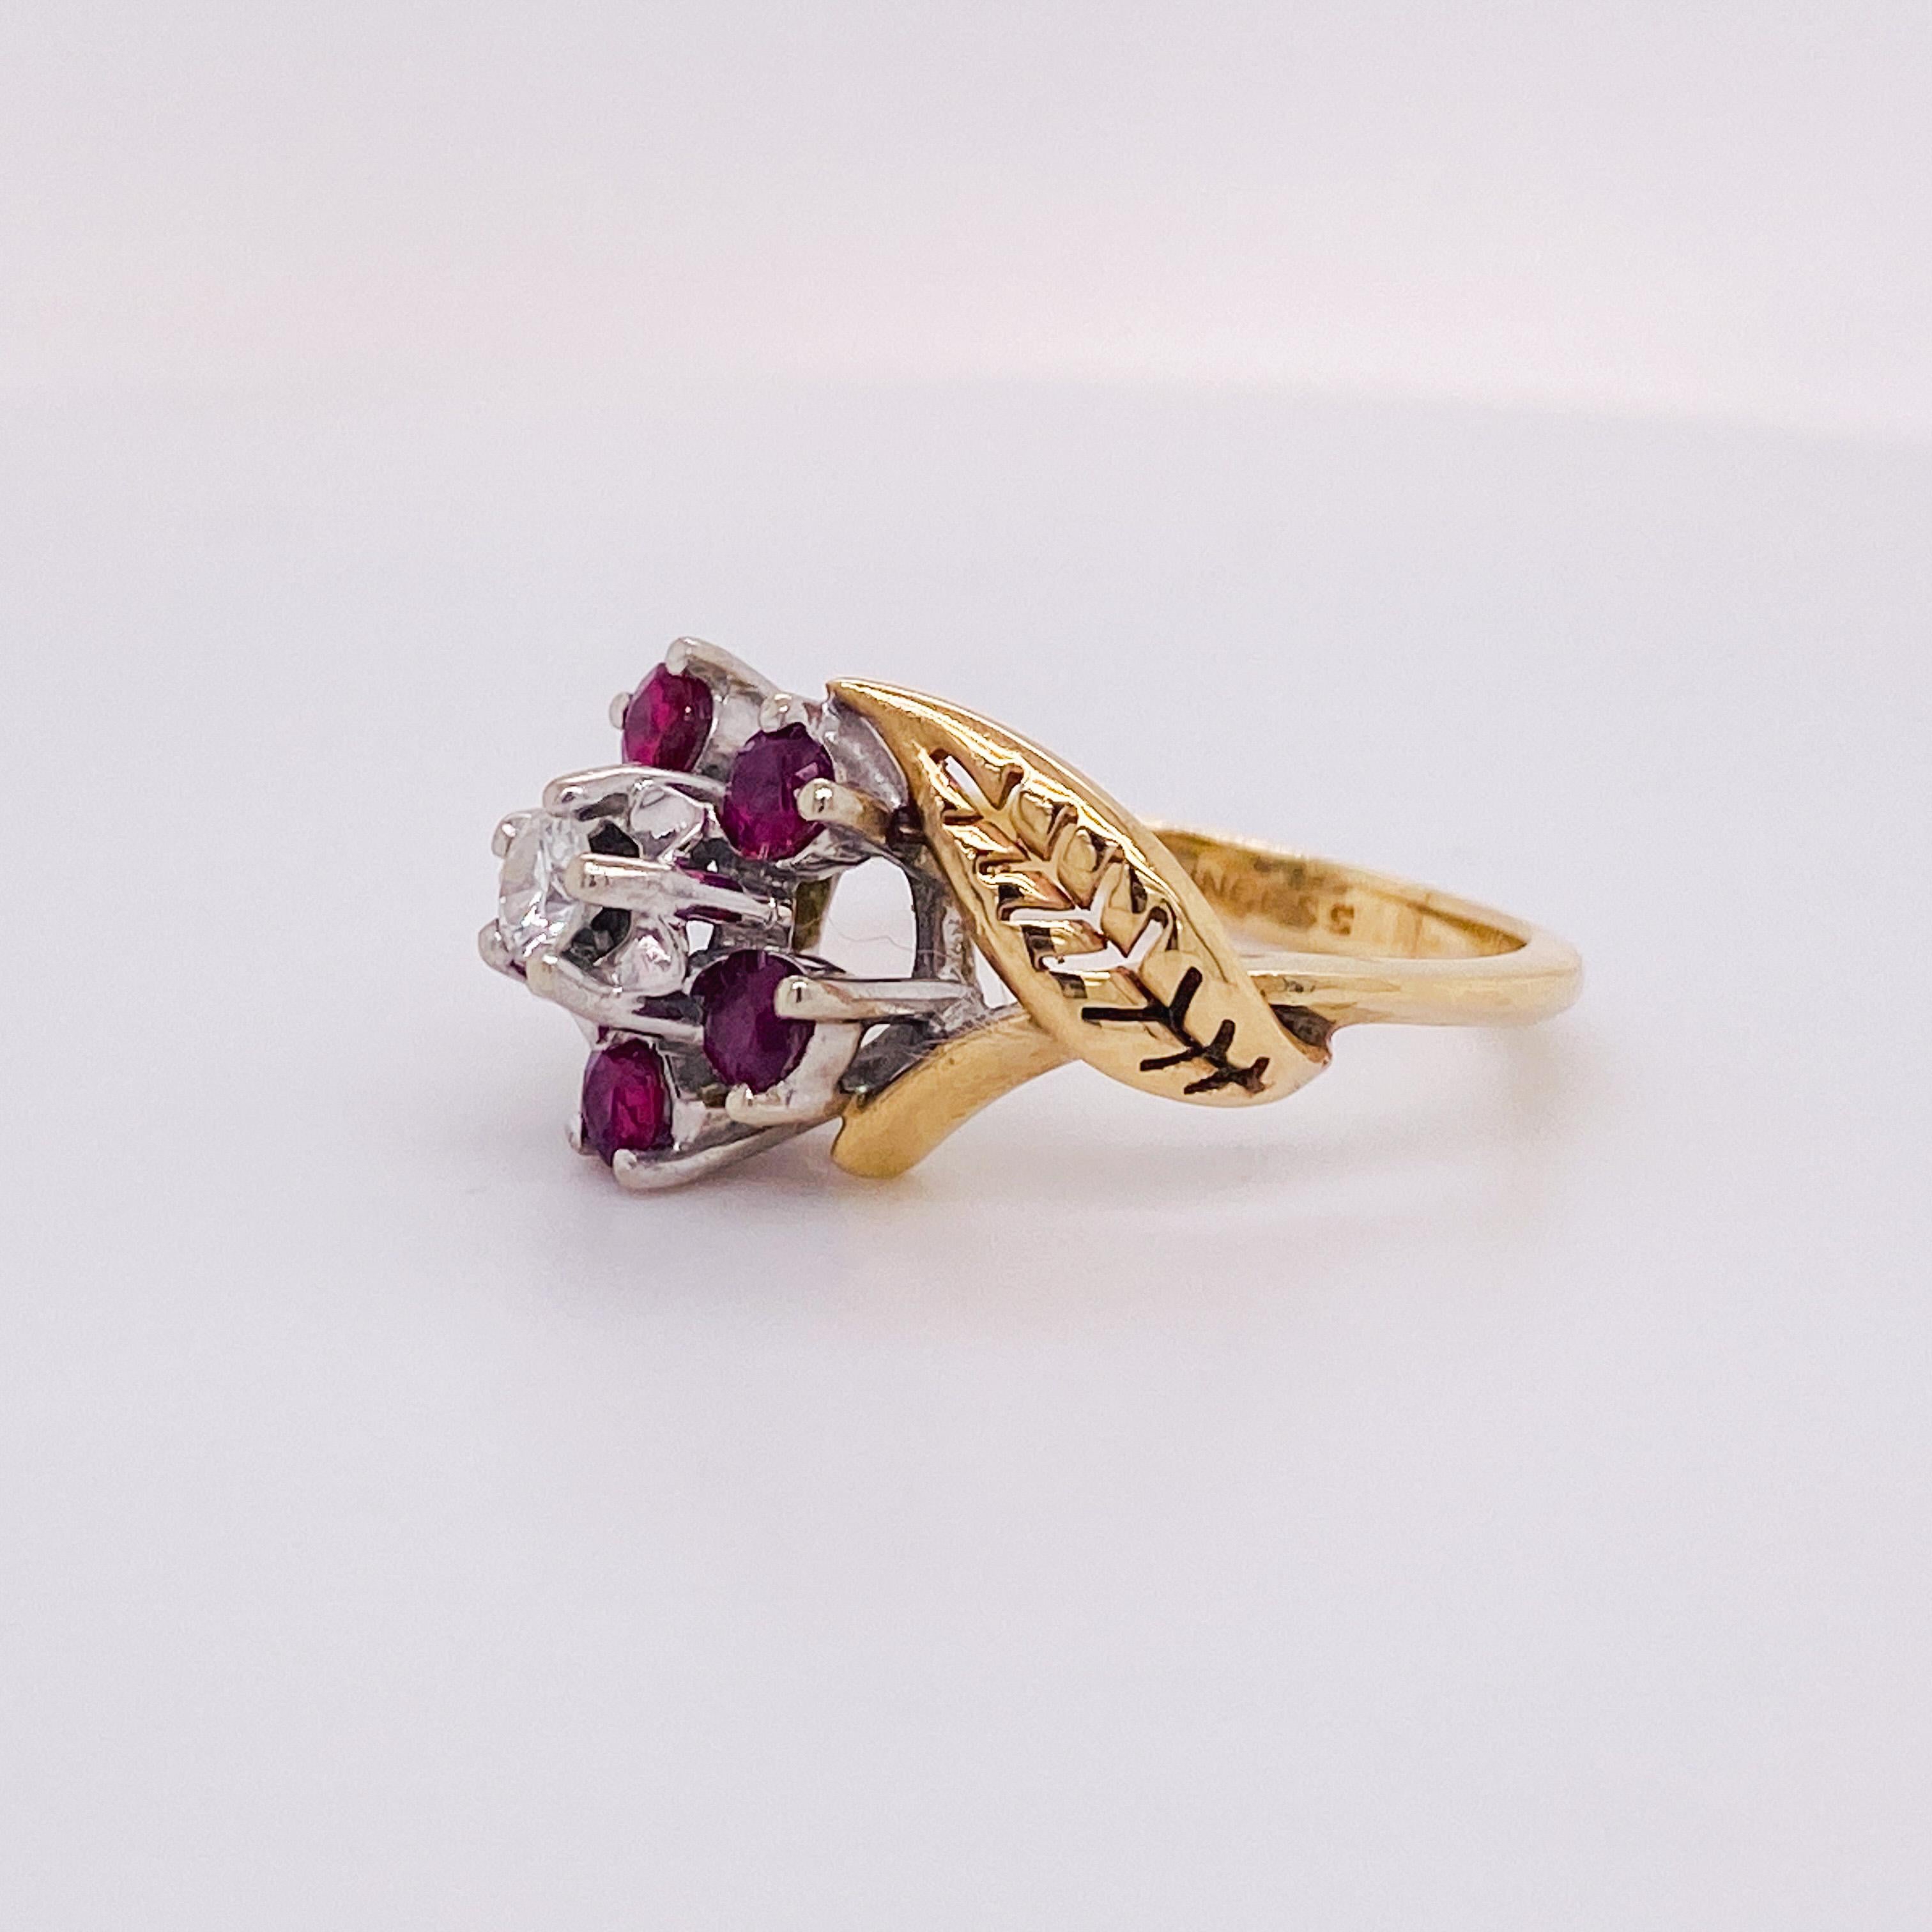 This graceful ruby flower ring demonstrates femininity and romance with its floral design! Light filters through the open design of the flower and pierced leaf that curves around the flower. For your ruby love, the rich purple-red colors of the